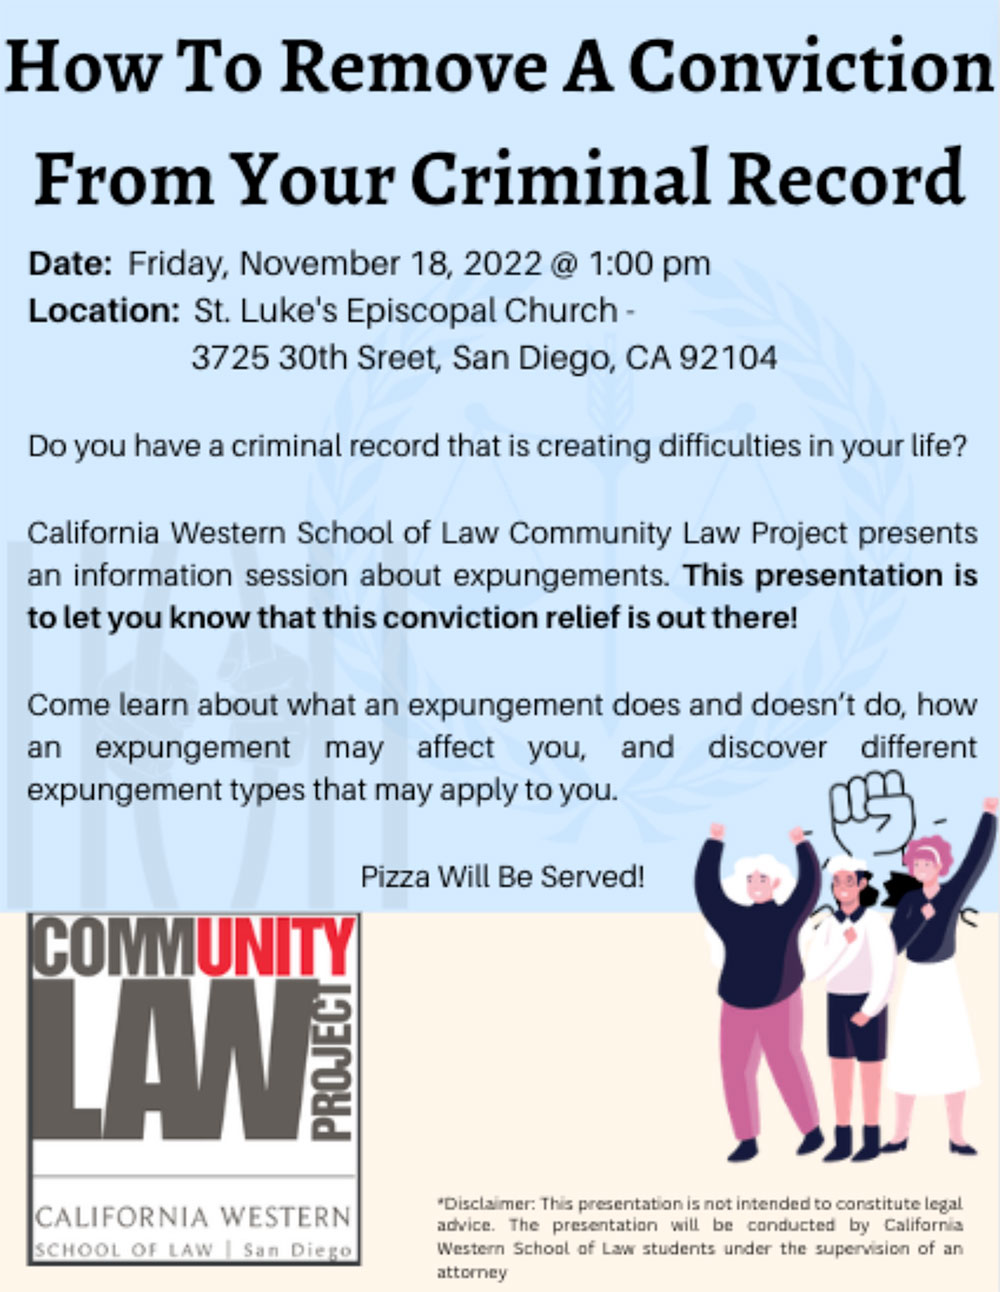 Remove a Conviction from your Criminal Record Event flyer